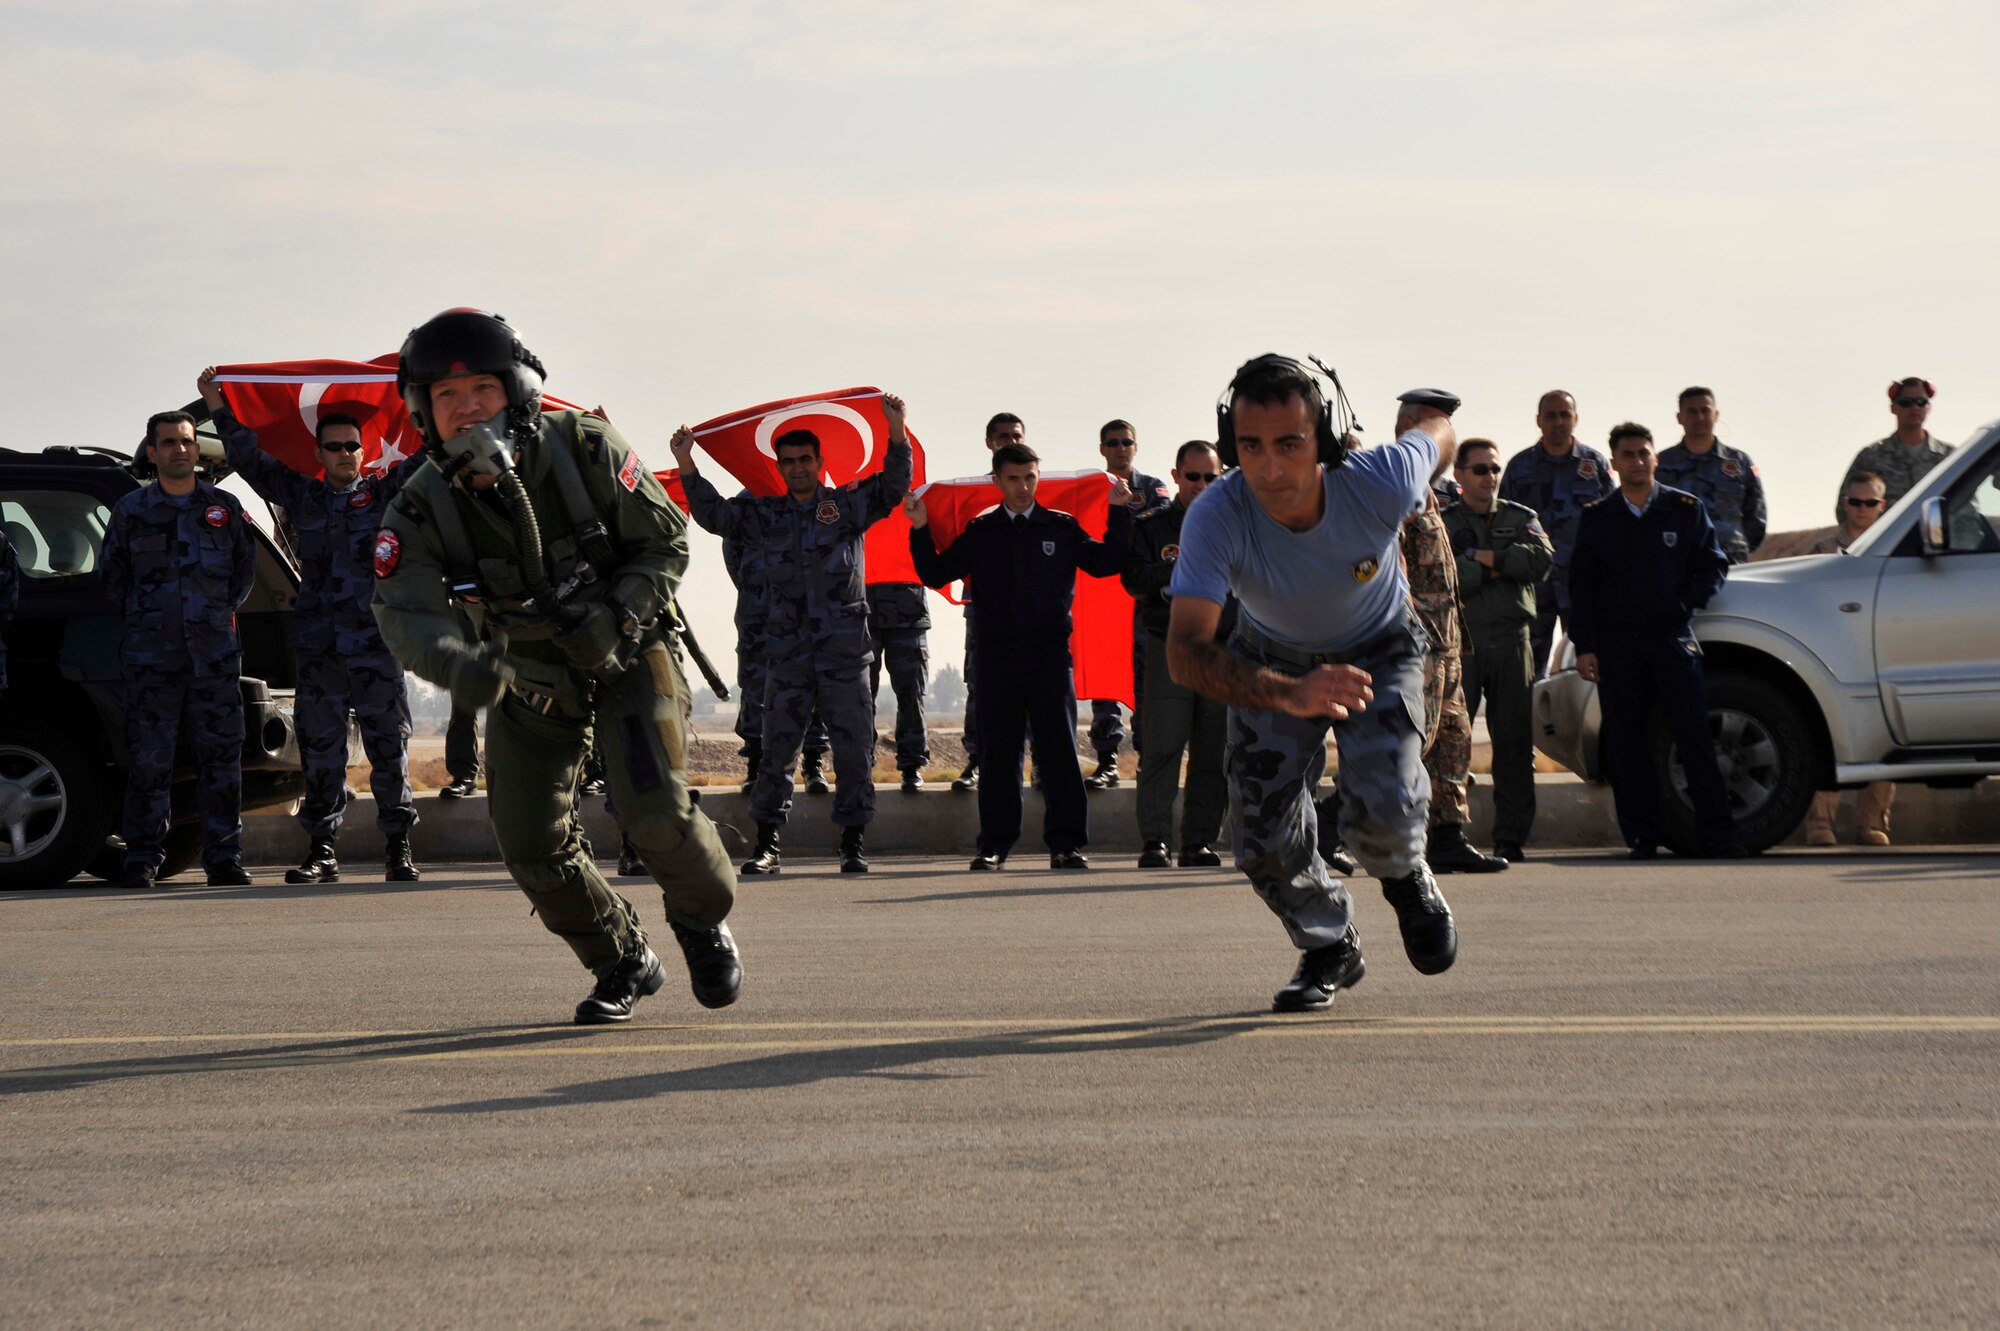 A Turkish pilot and crew chief run to their F-16 during the scramble launch competition at Falcon Air Meet 2008. Each team reacts to a simulated threat and must get their aircraft launched in the in the shortest amount of time without incurring penalties for safety violations. 